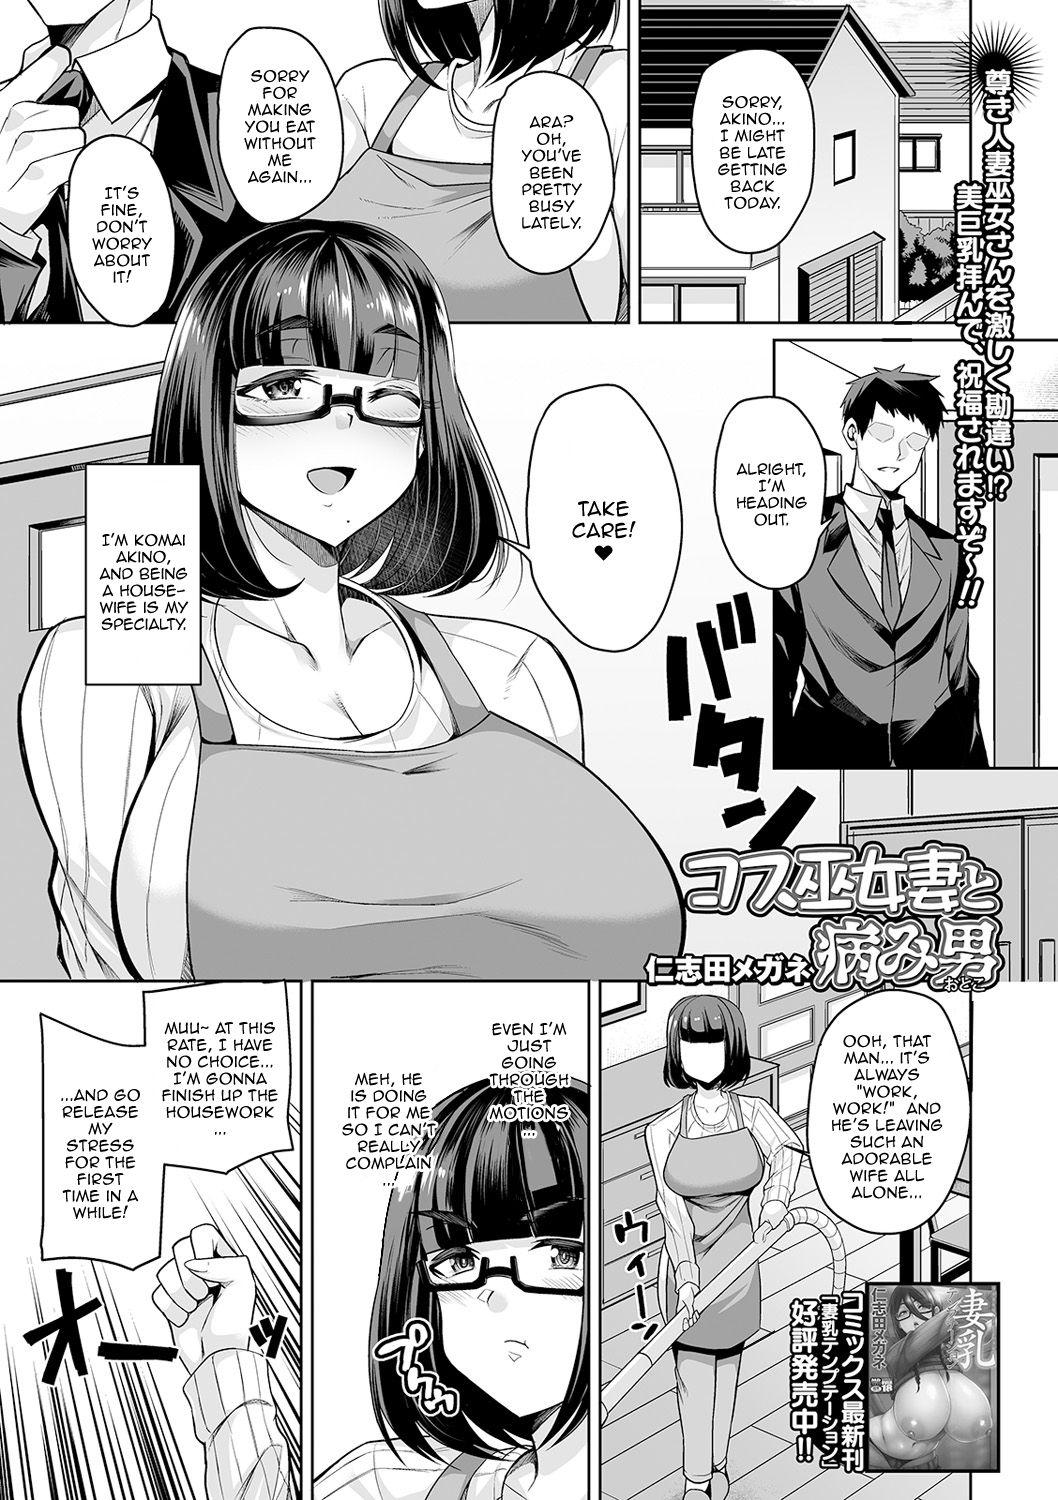 Bubblebutt Cos Miko Zuma to Yami Otoko | The Cosplaying Shrine Maiden And The Suffering Man Amateur Sex Tapes - Page 1